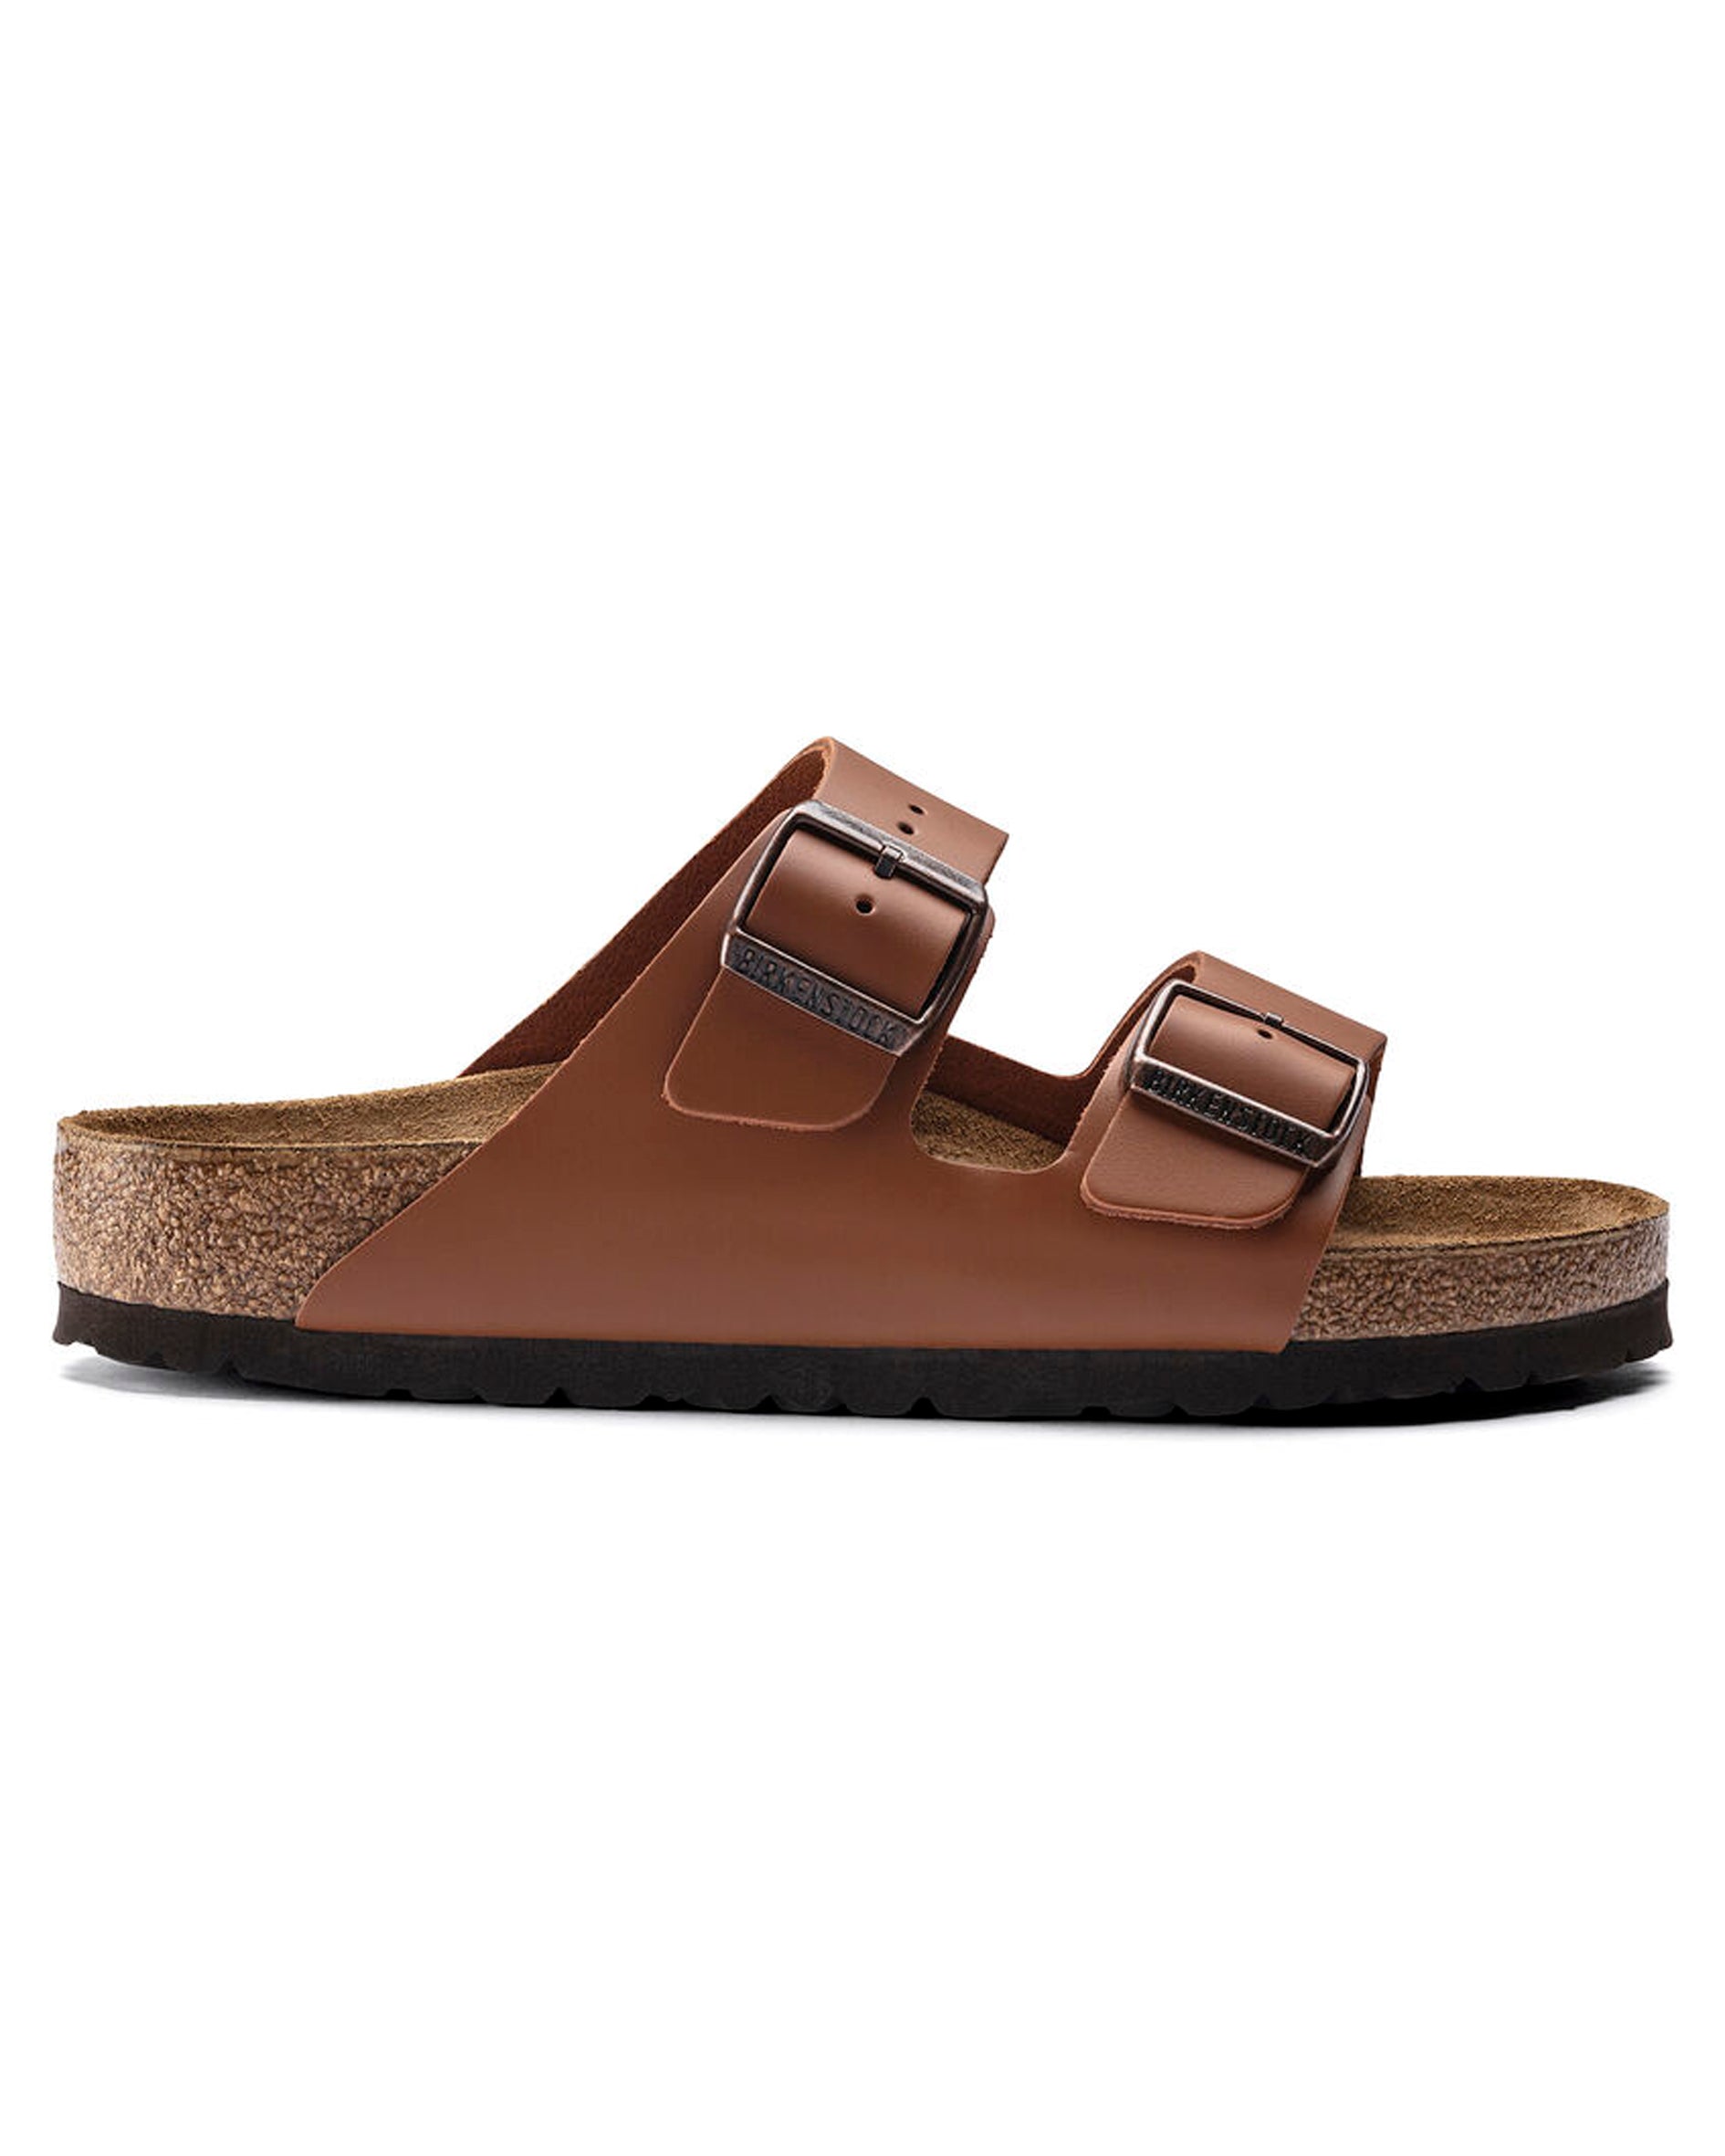 Arizona Ginger Brown Leather Sandals